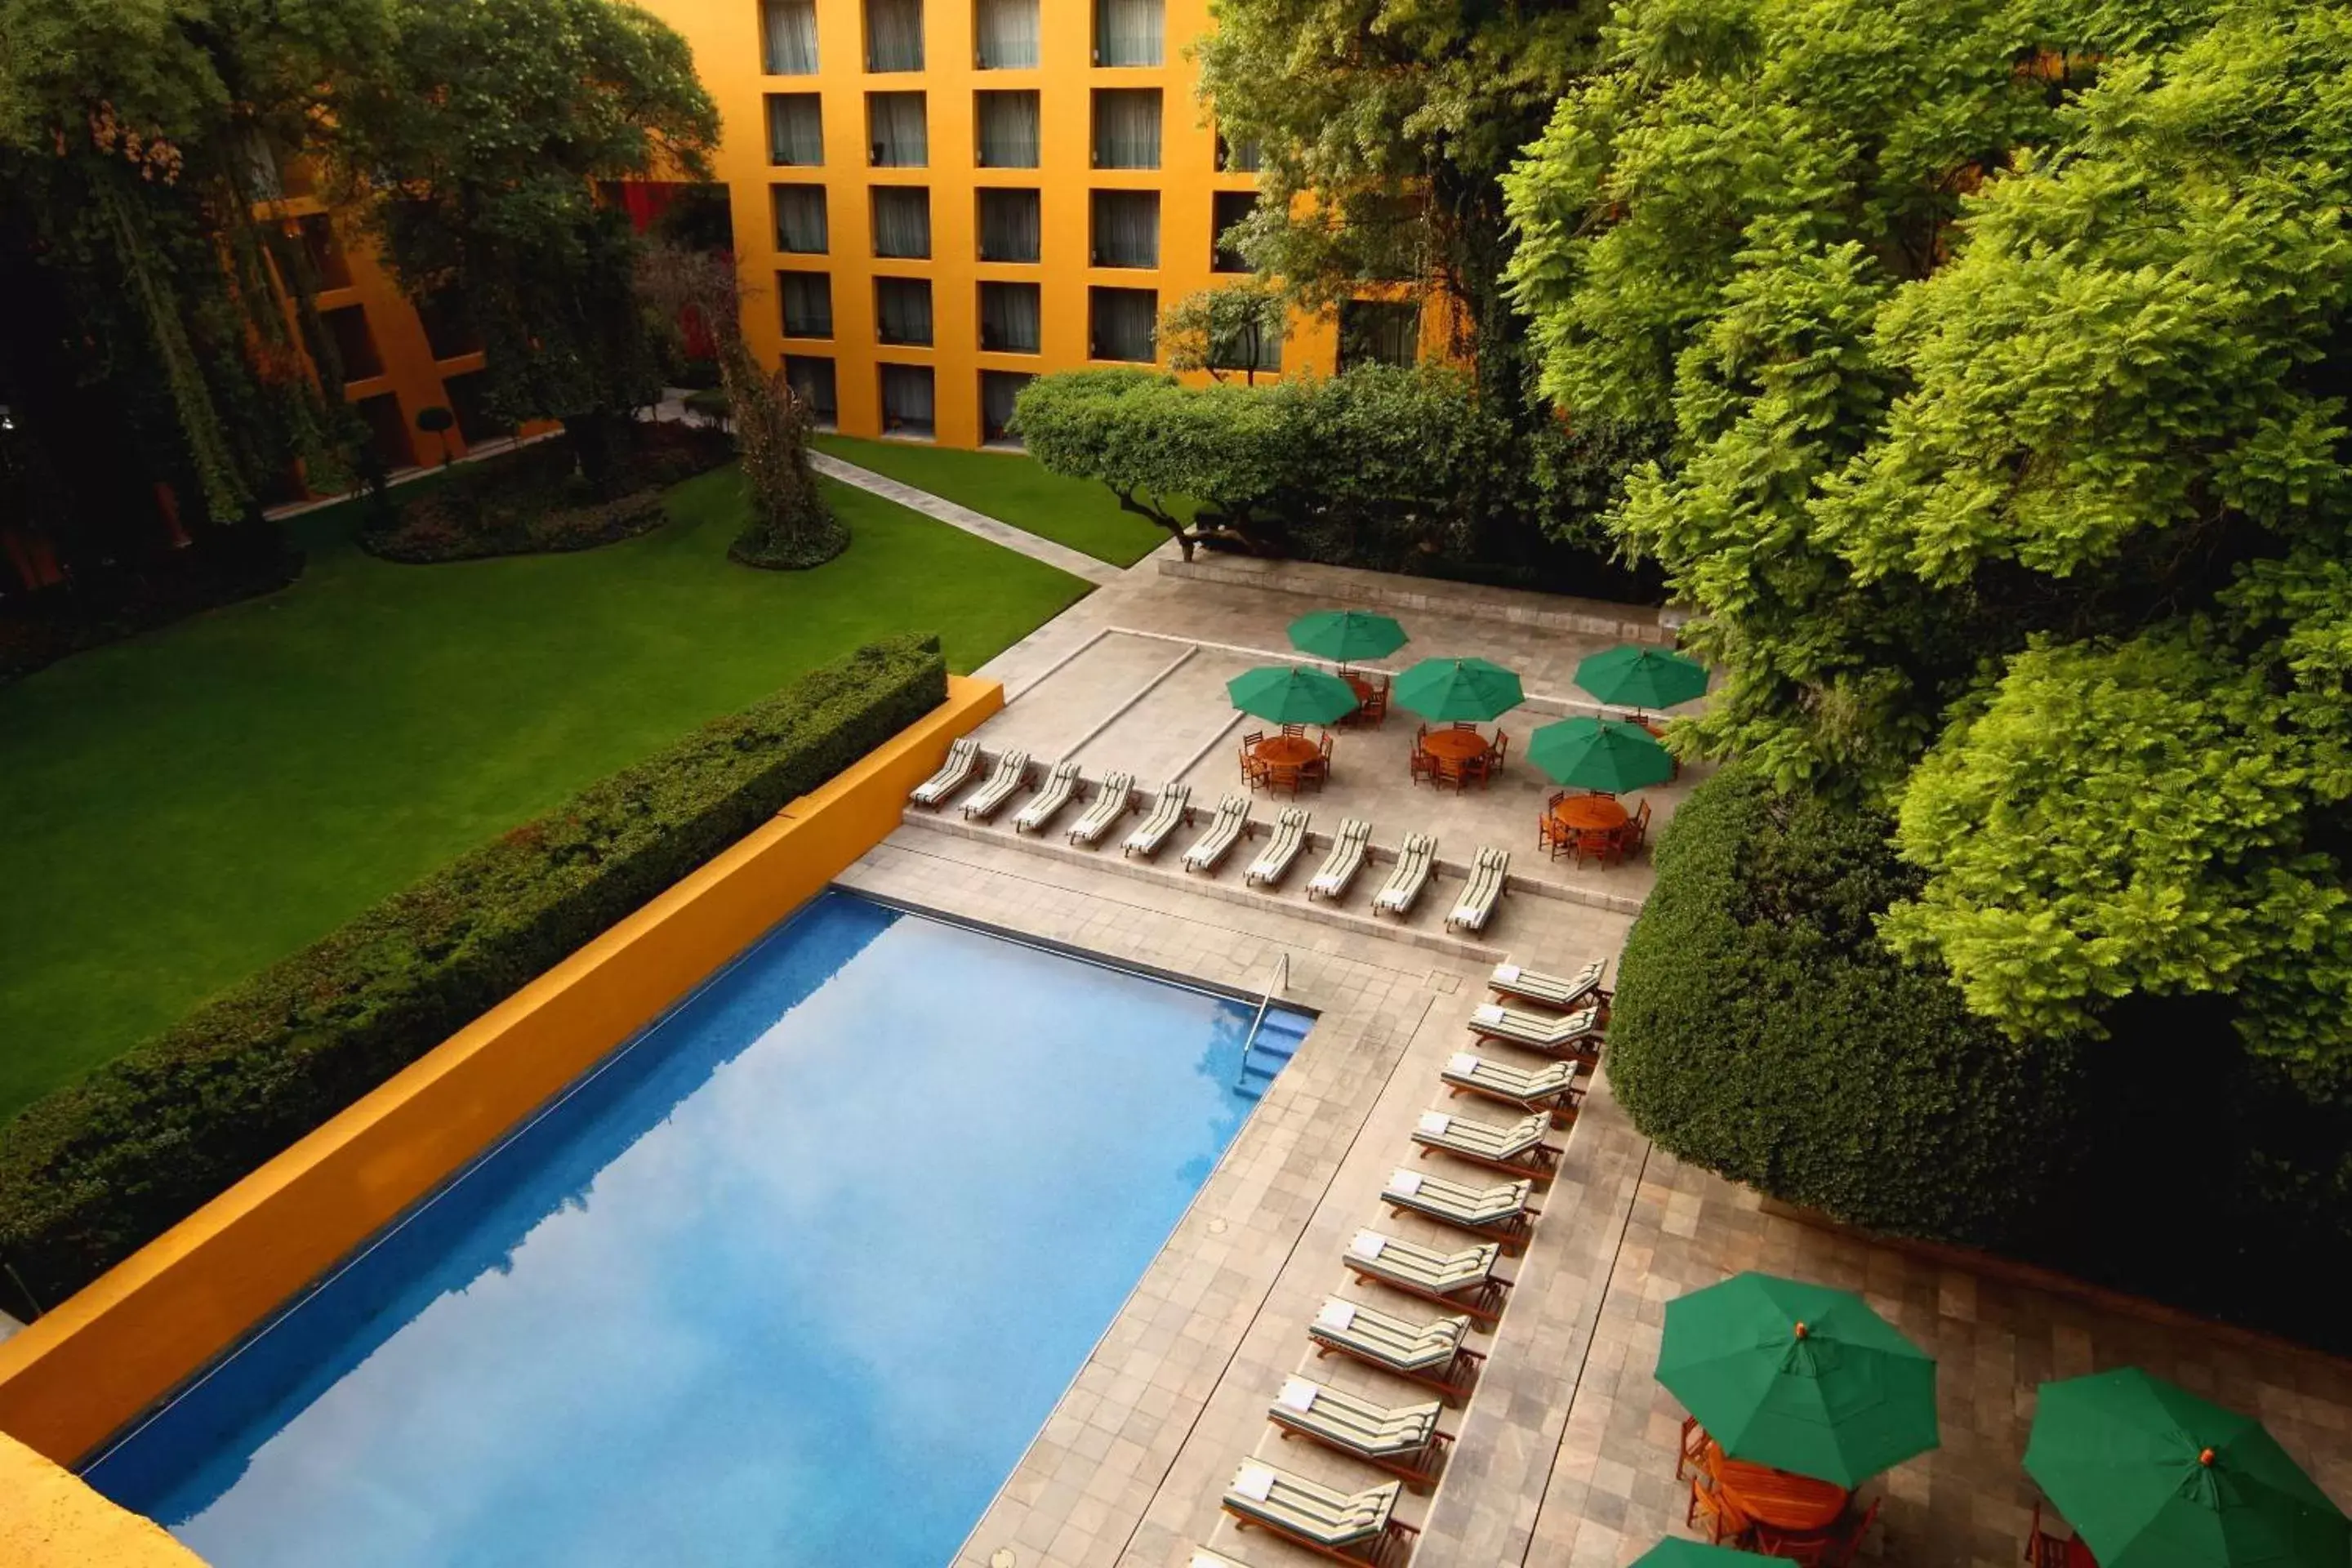 Swimming pool, Pool View in Camino Real Polanco Mexico